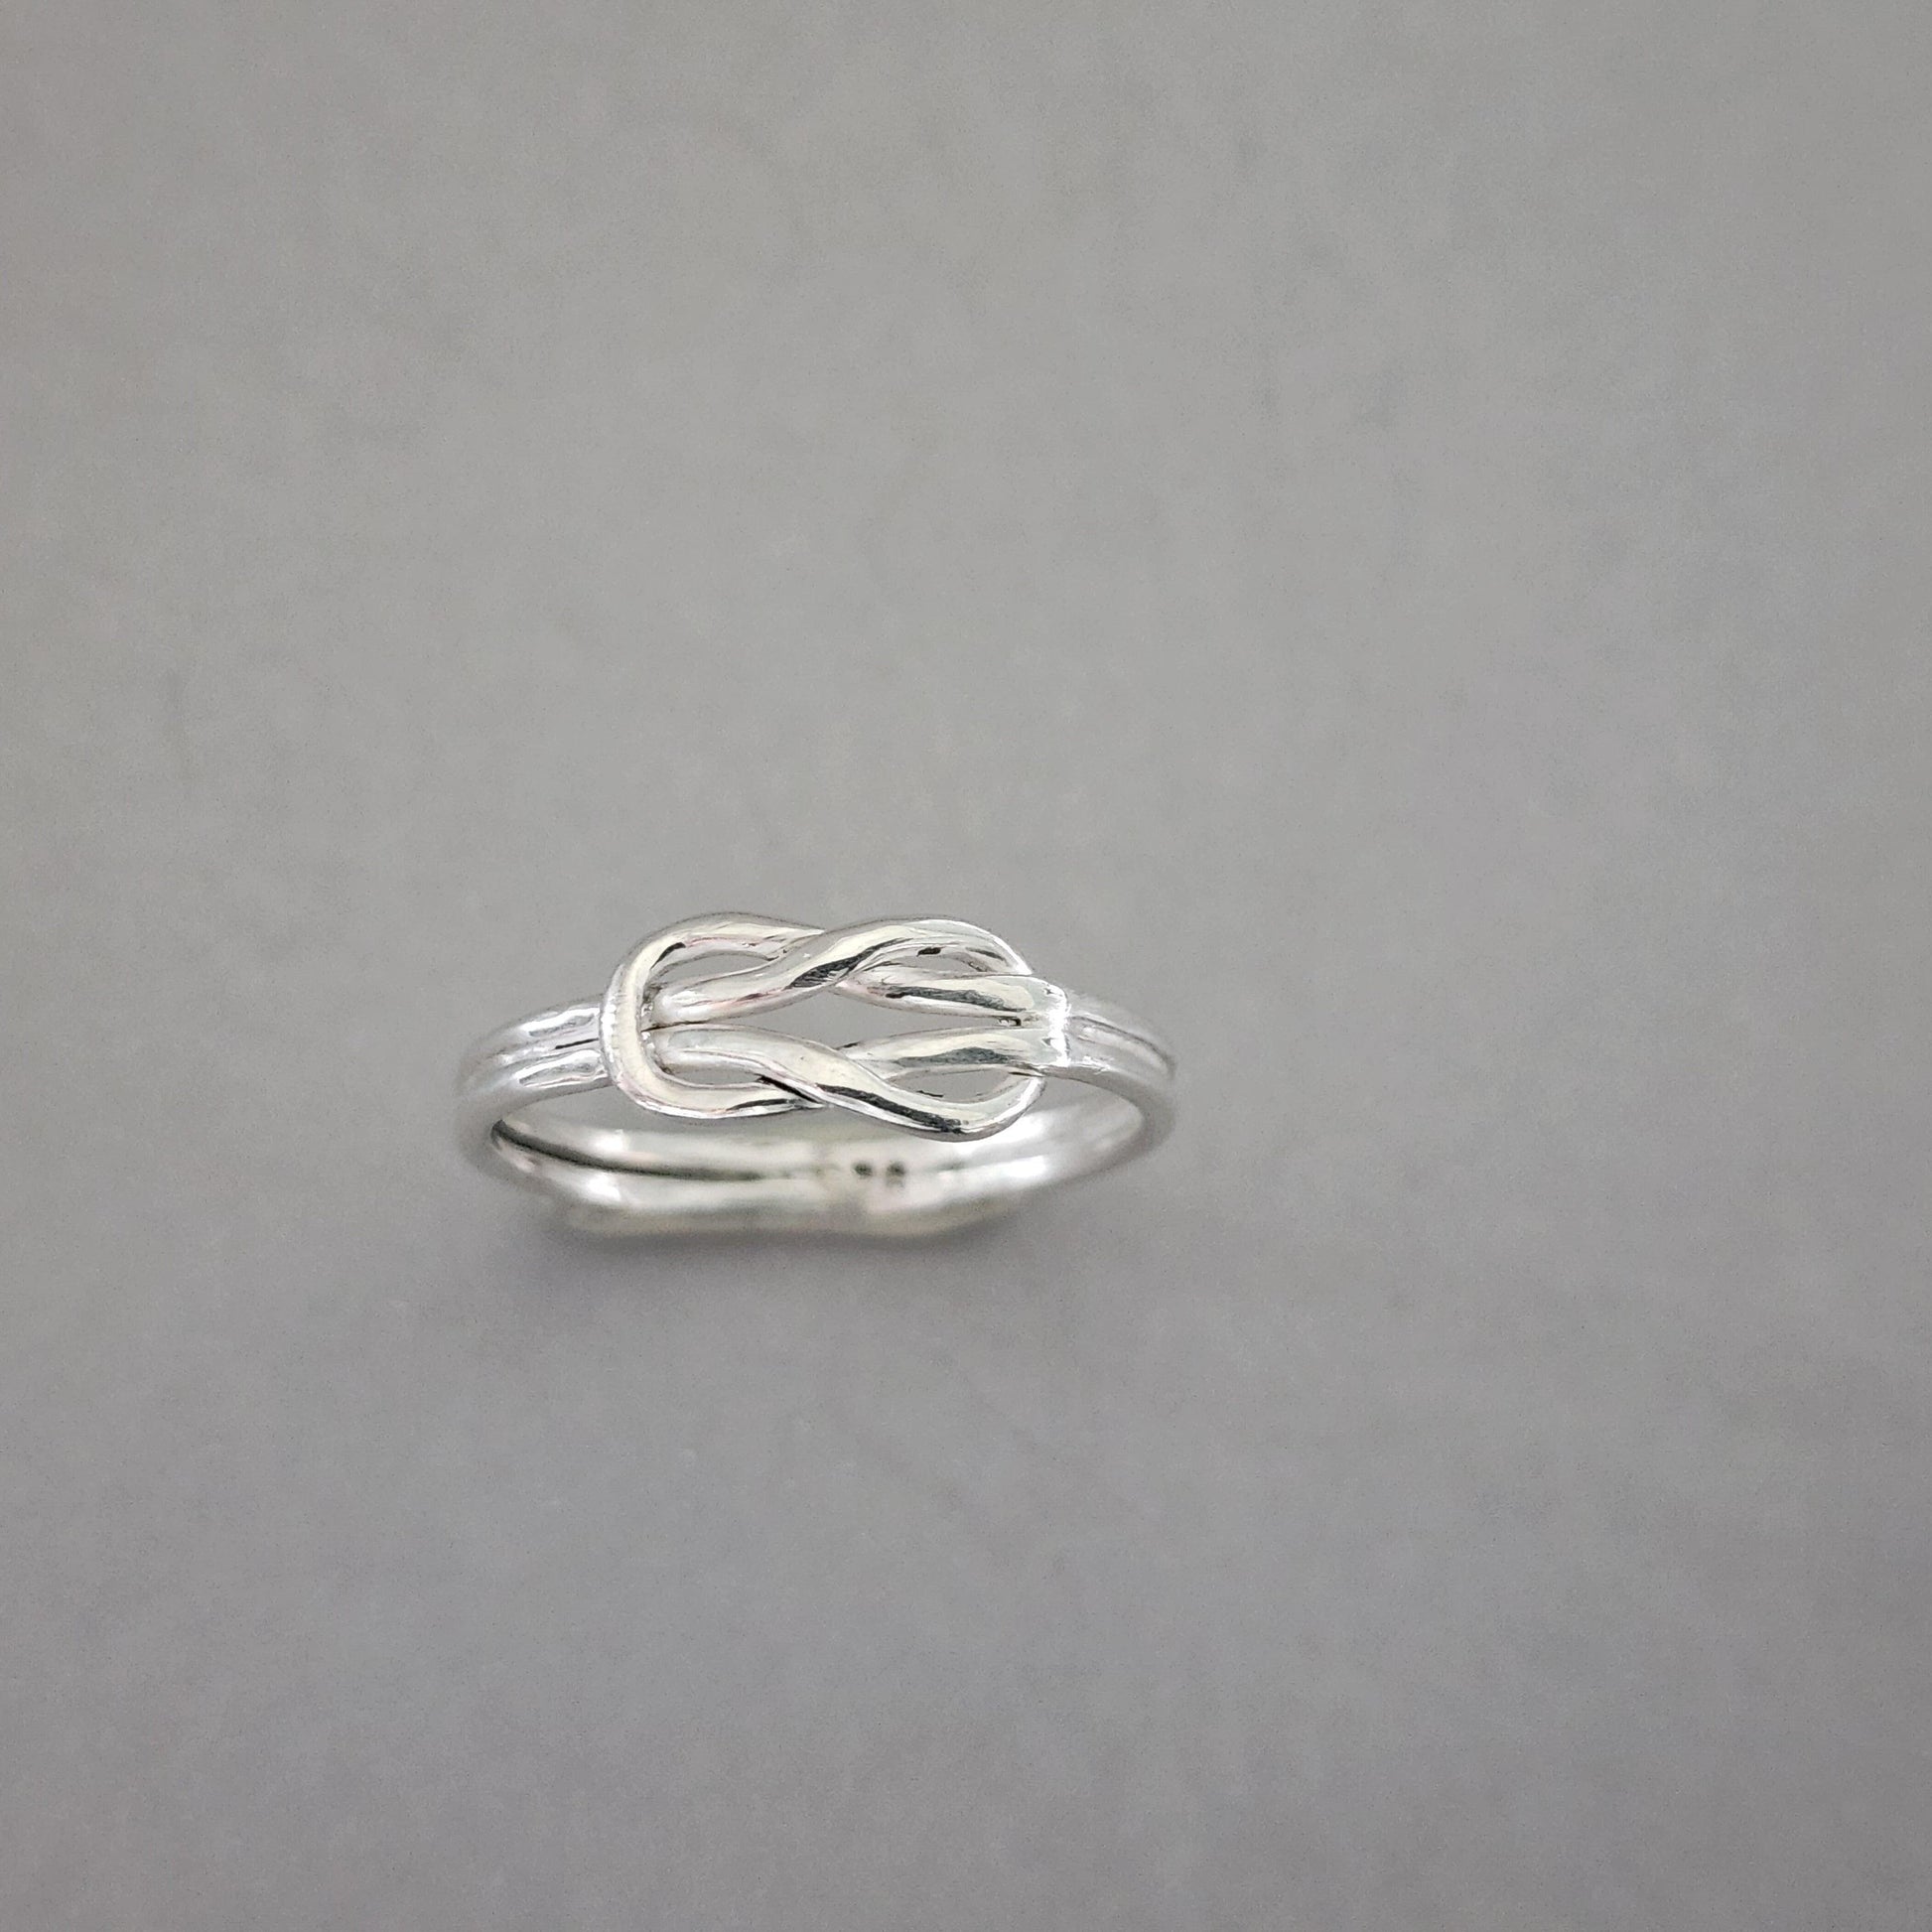 Handmade Womans Sterling Silver Love Knot Ring - Gilded Heart Designs